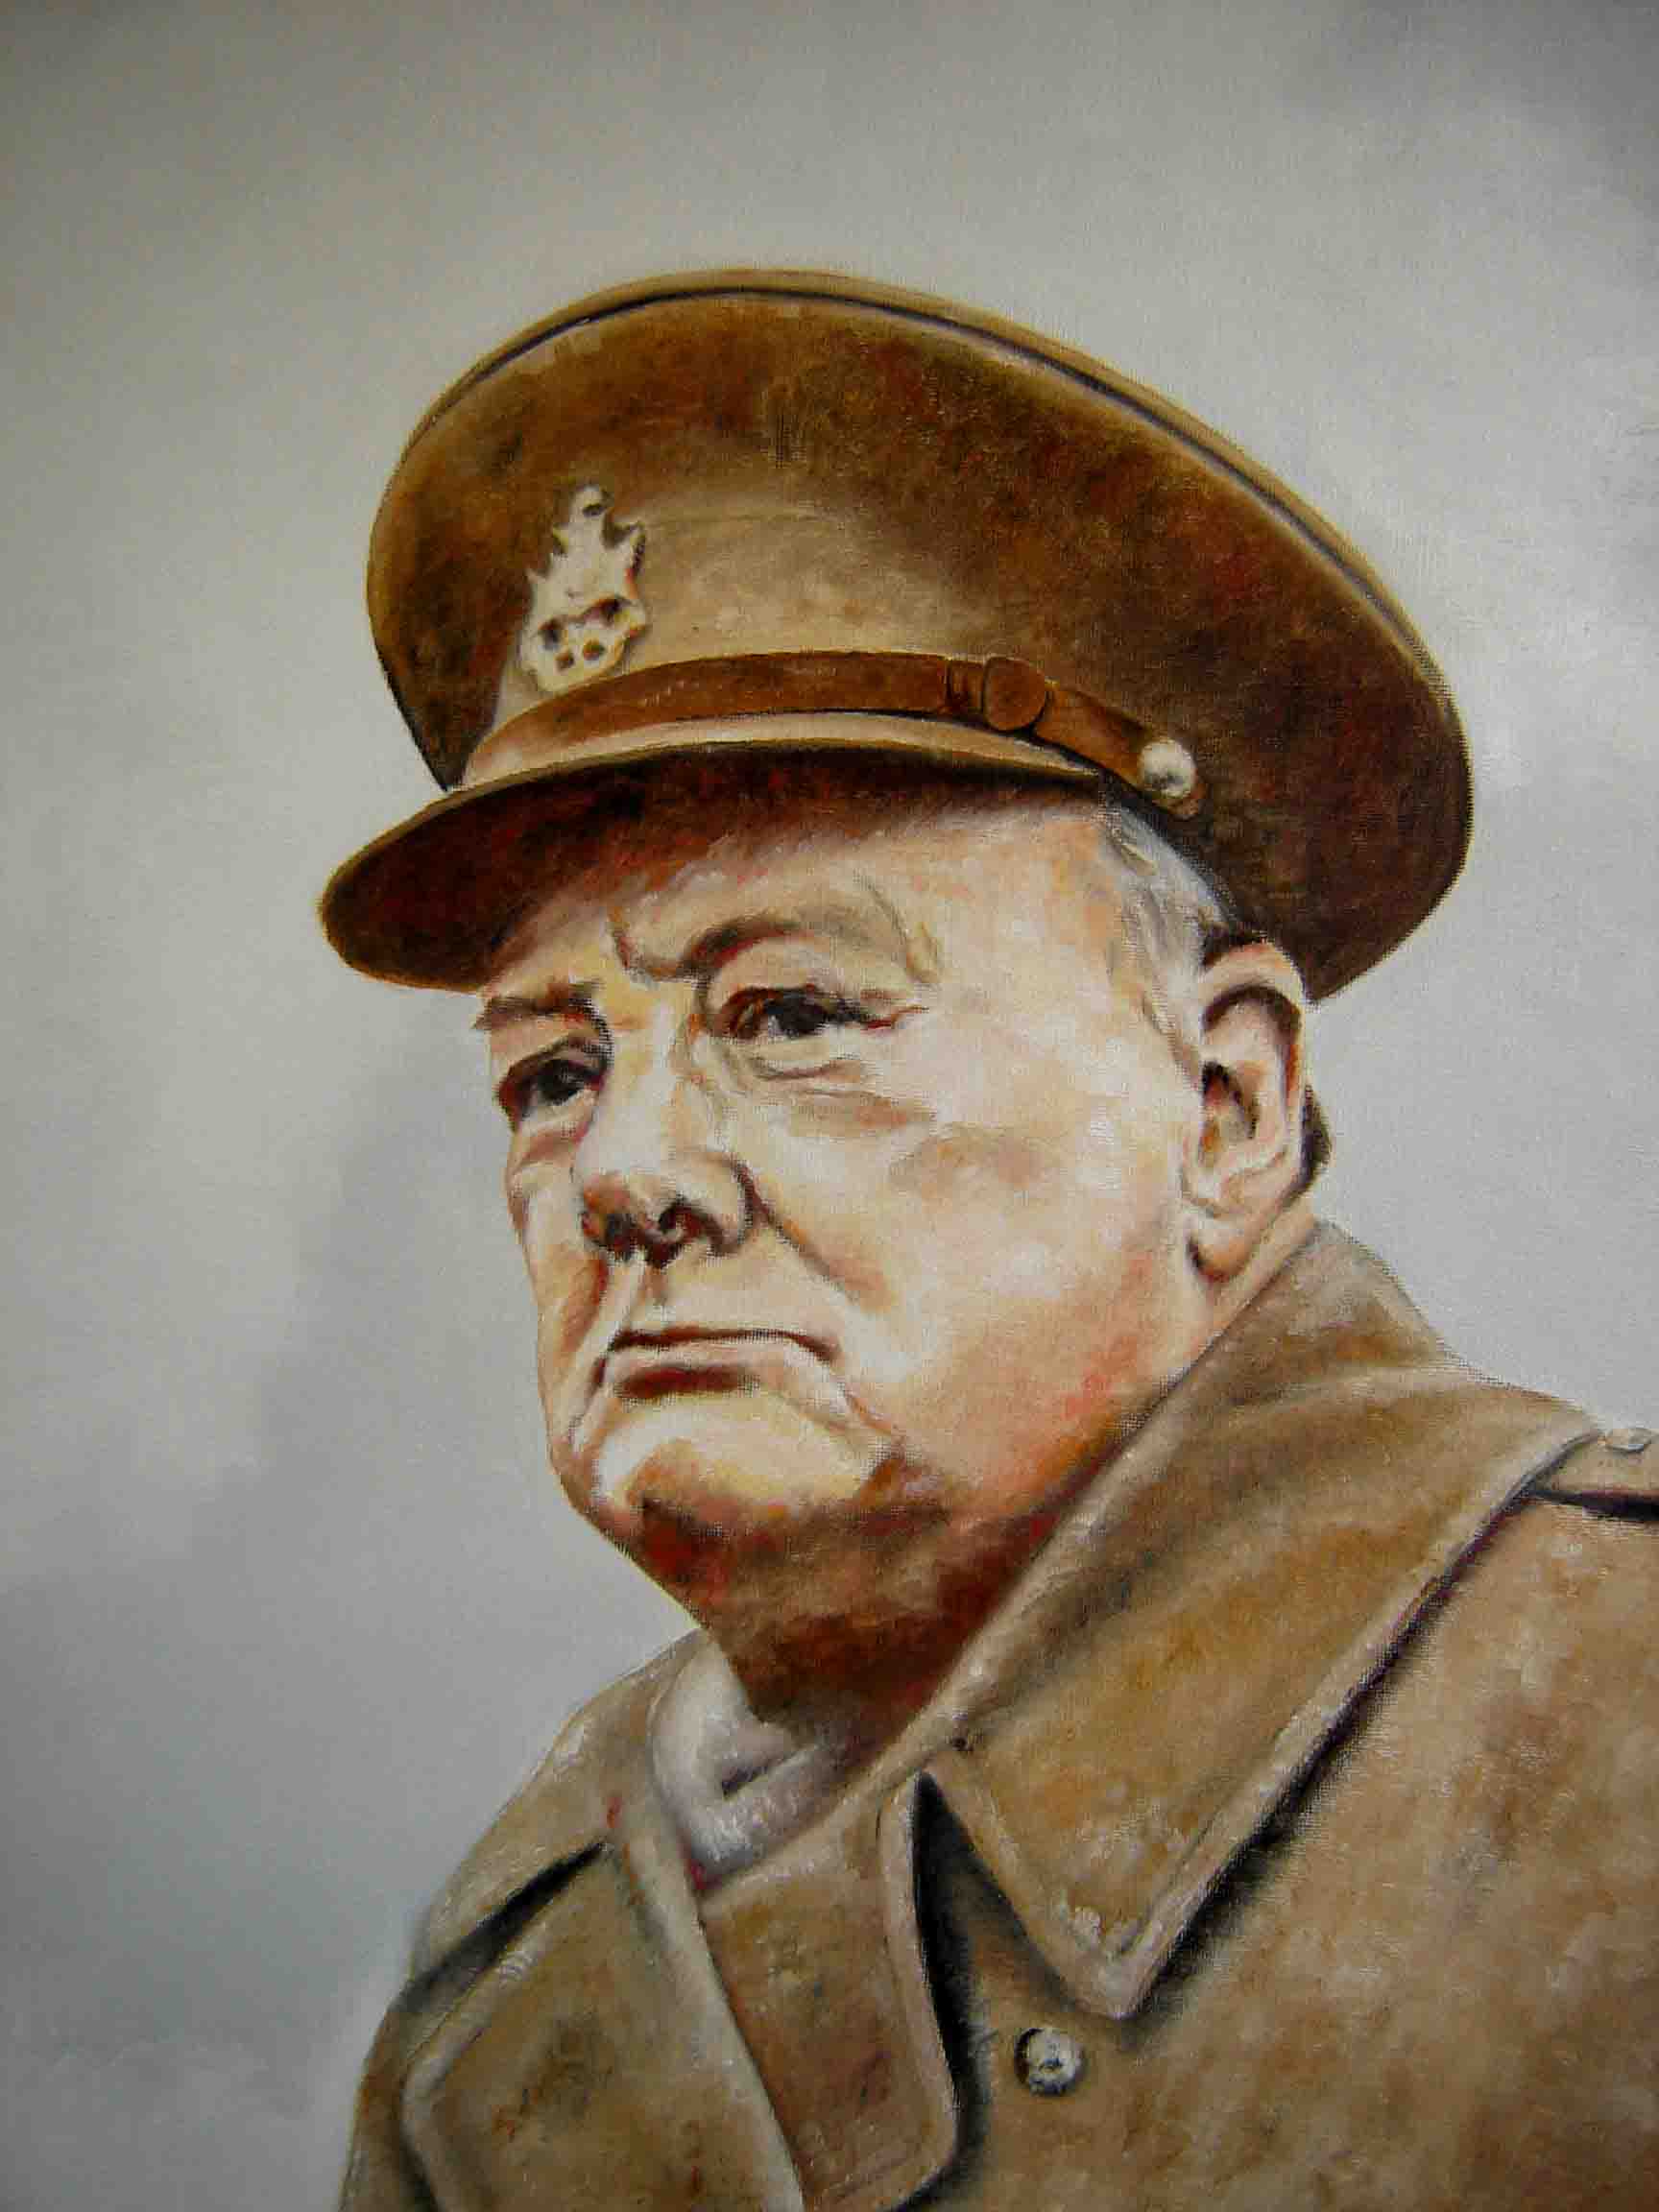 Prominent figures - Portraits by Donald Sheridan - oil paintings